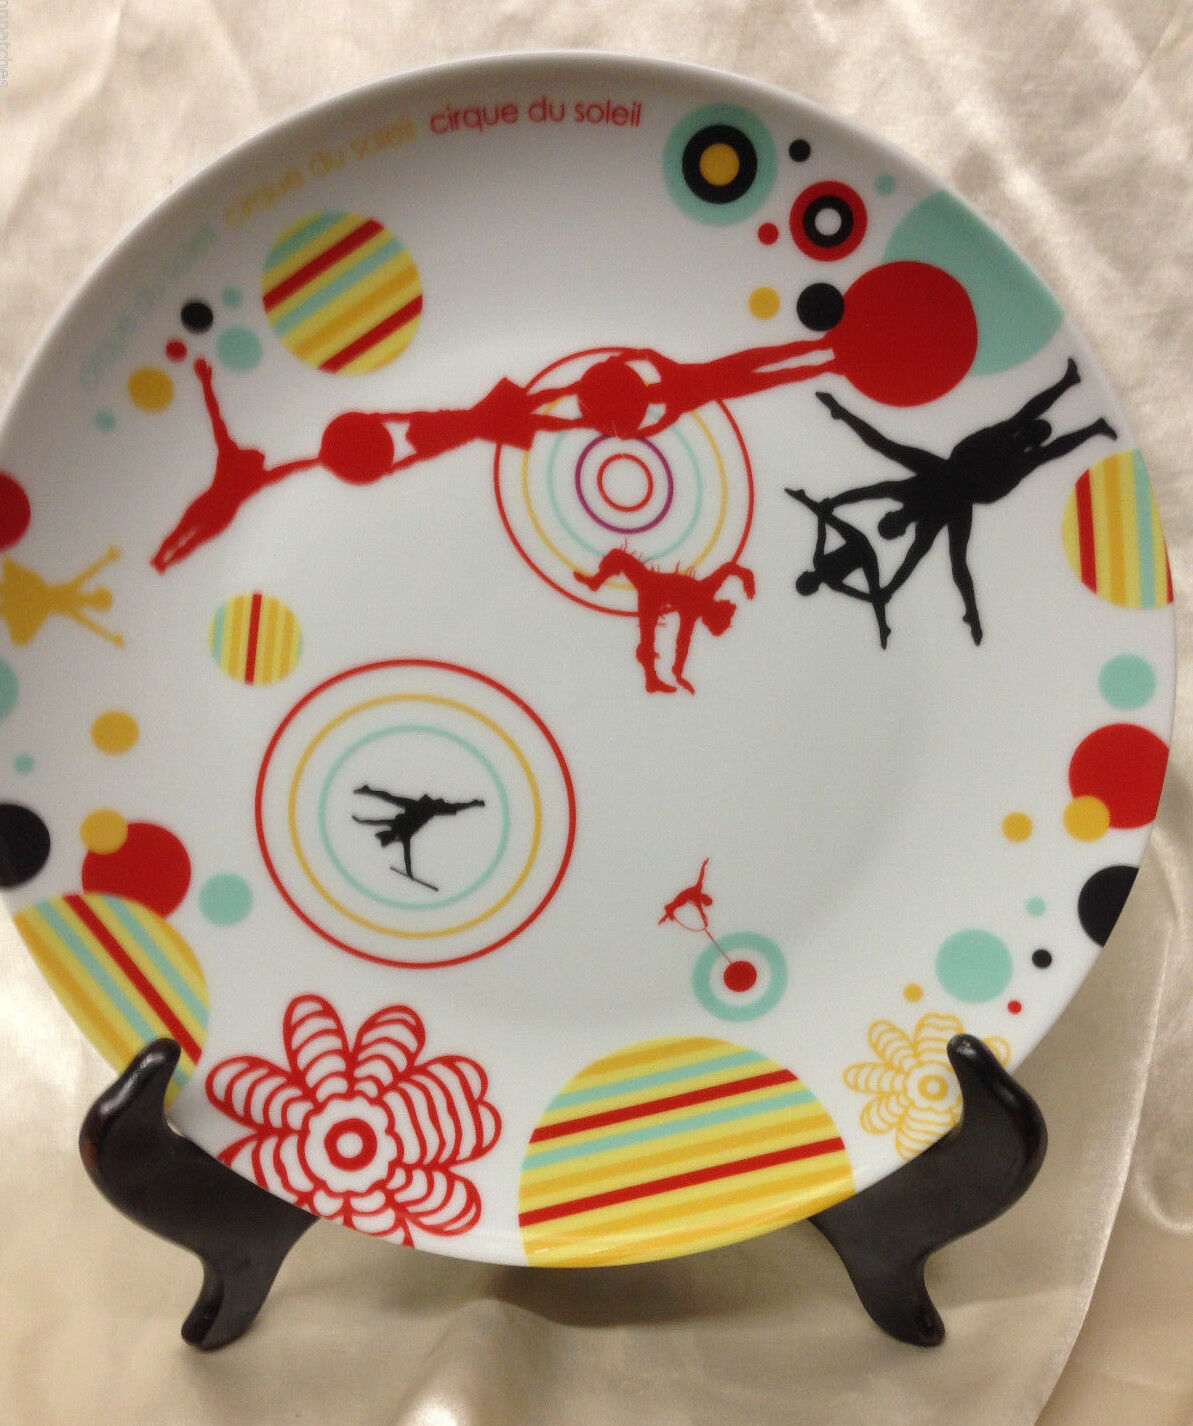 Cirque Du Soleil Dinner Plate 10 1/2" Rings Dots Figures Red Black Blue Yellow